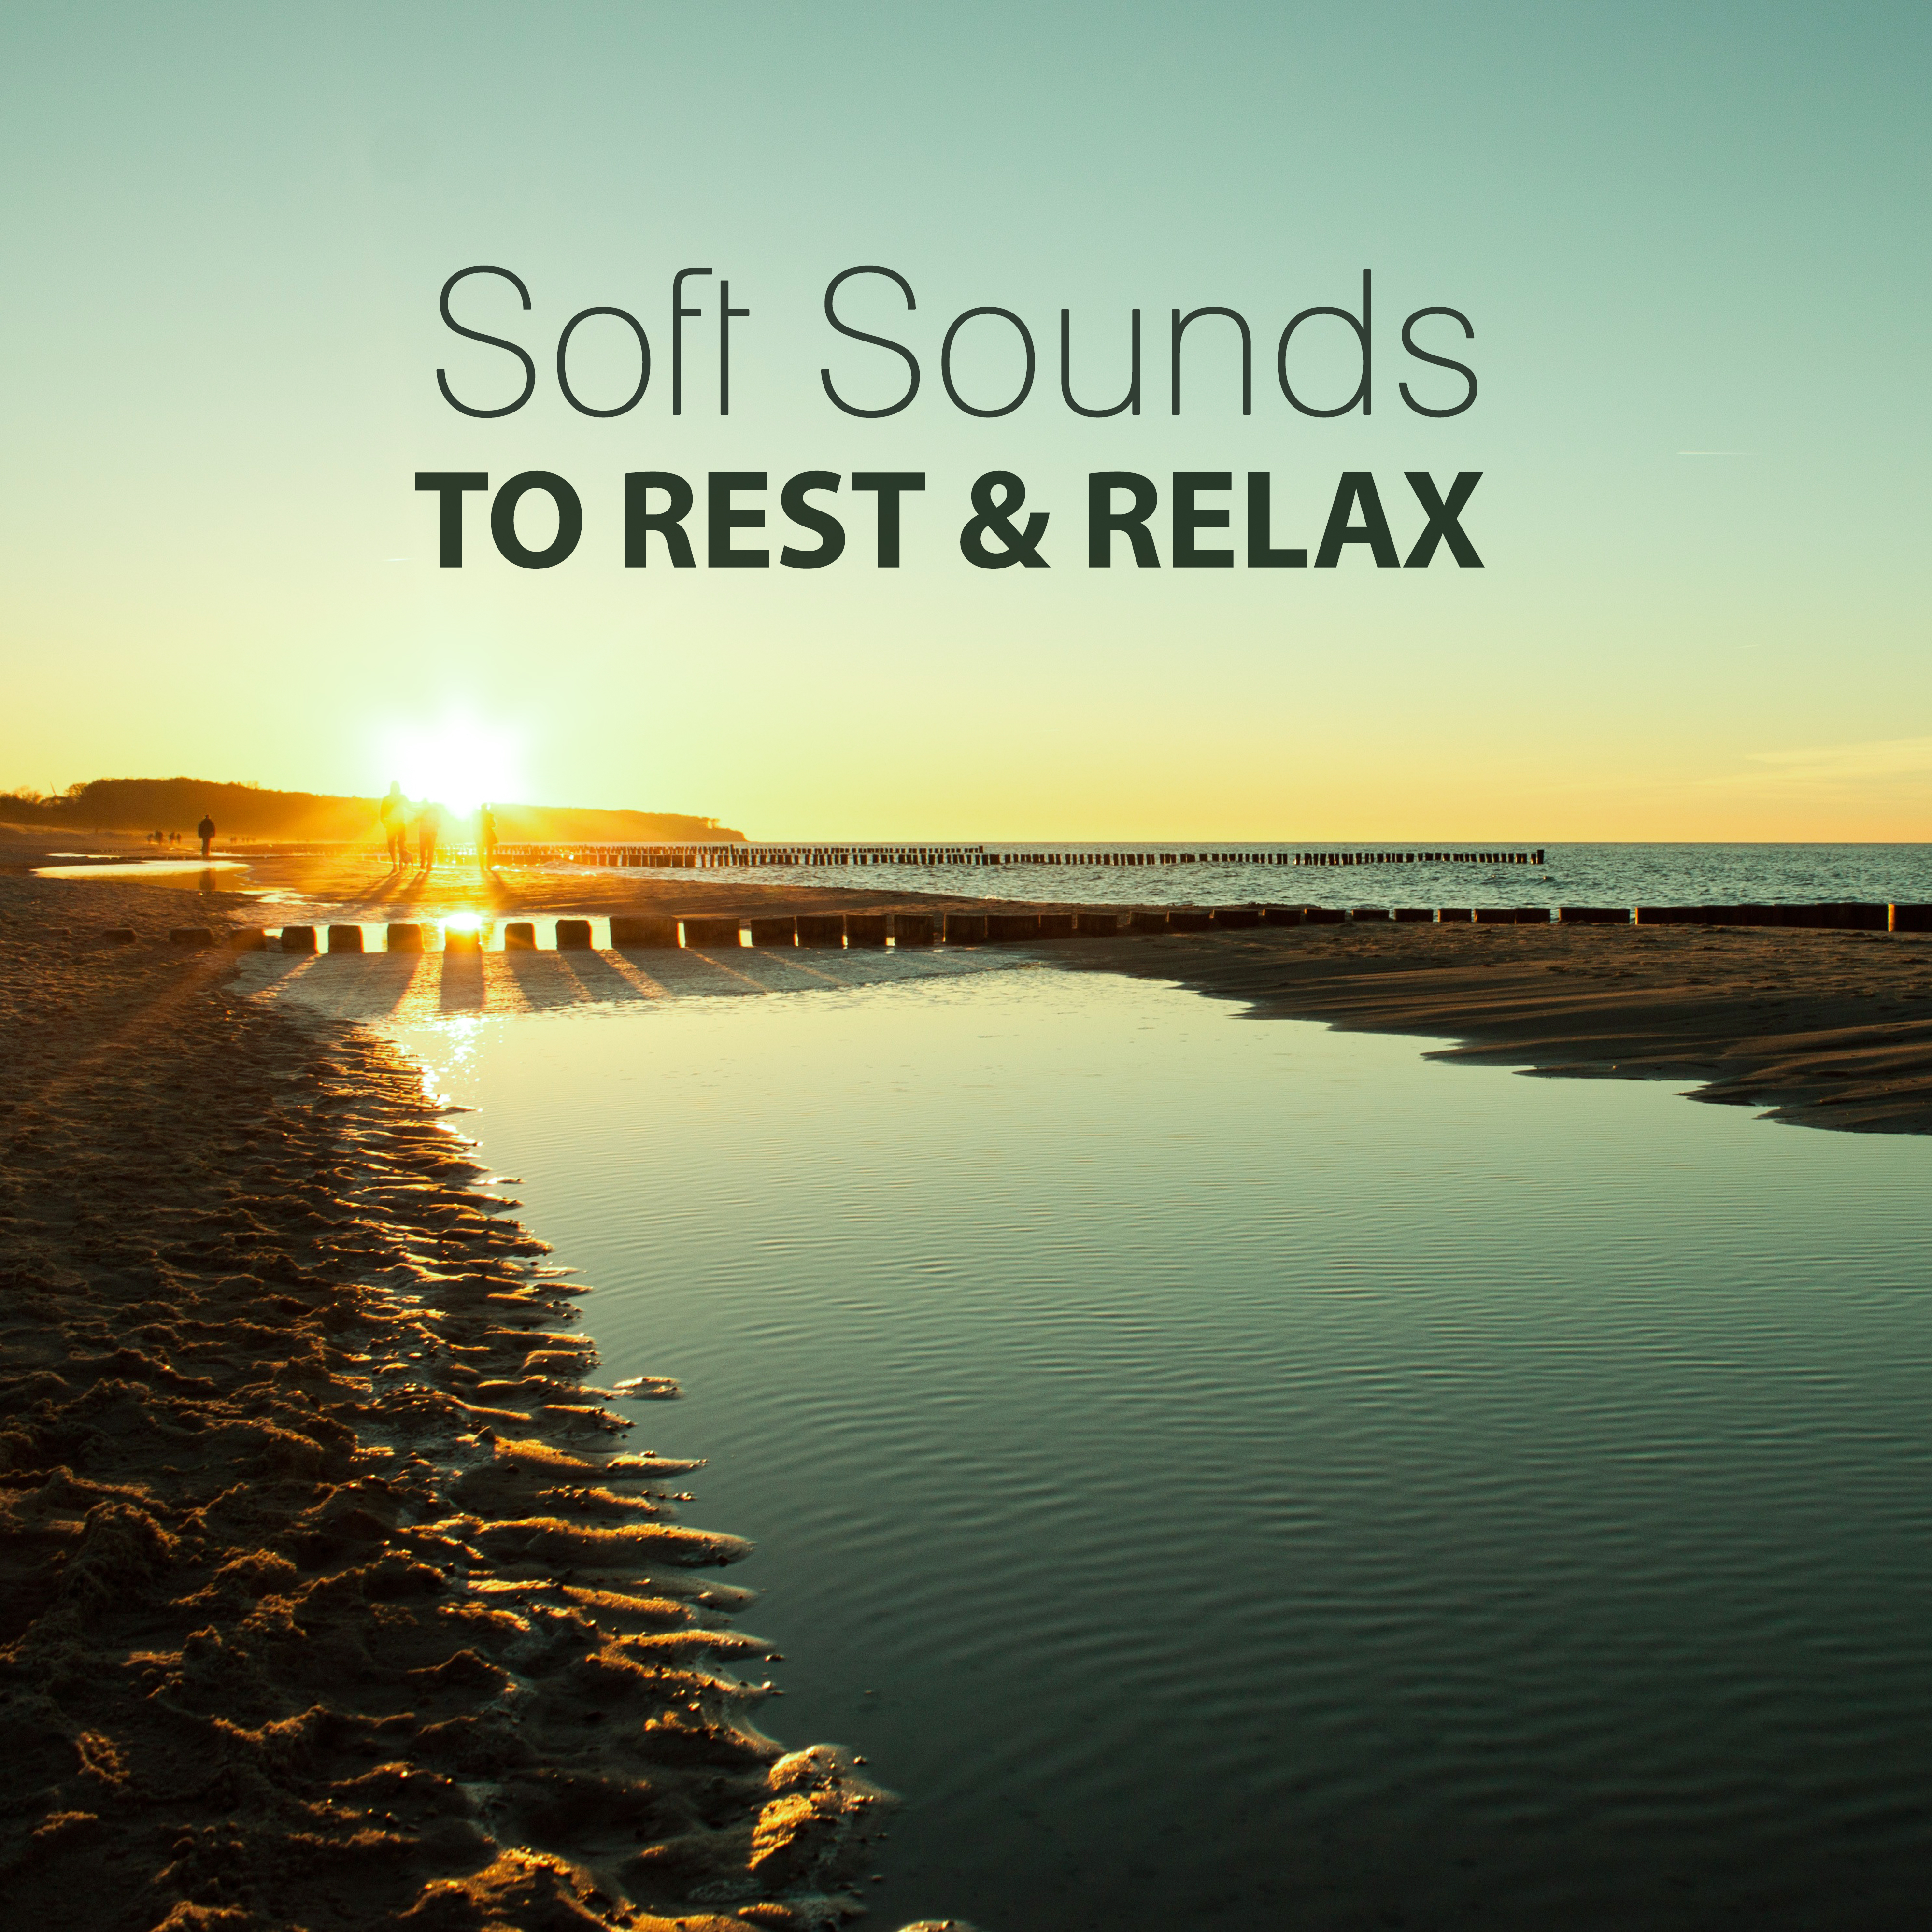 Soft Sounds to Rest & Relax – Calming Chill Out Music, Rest a Bit, Soothing Sounds